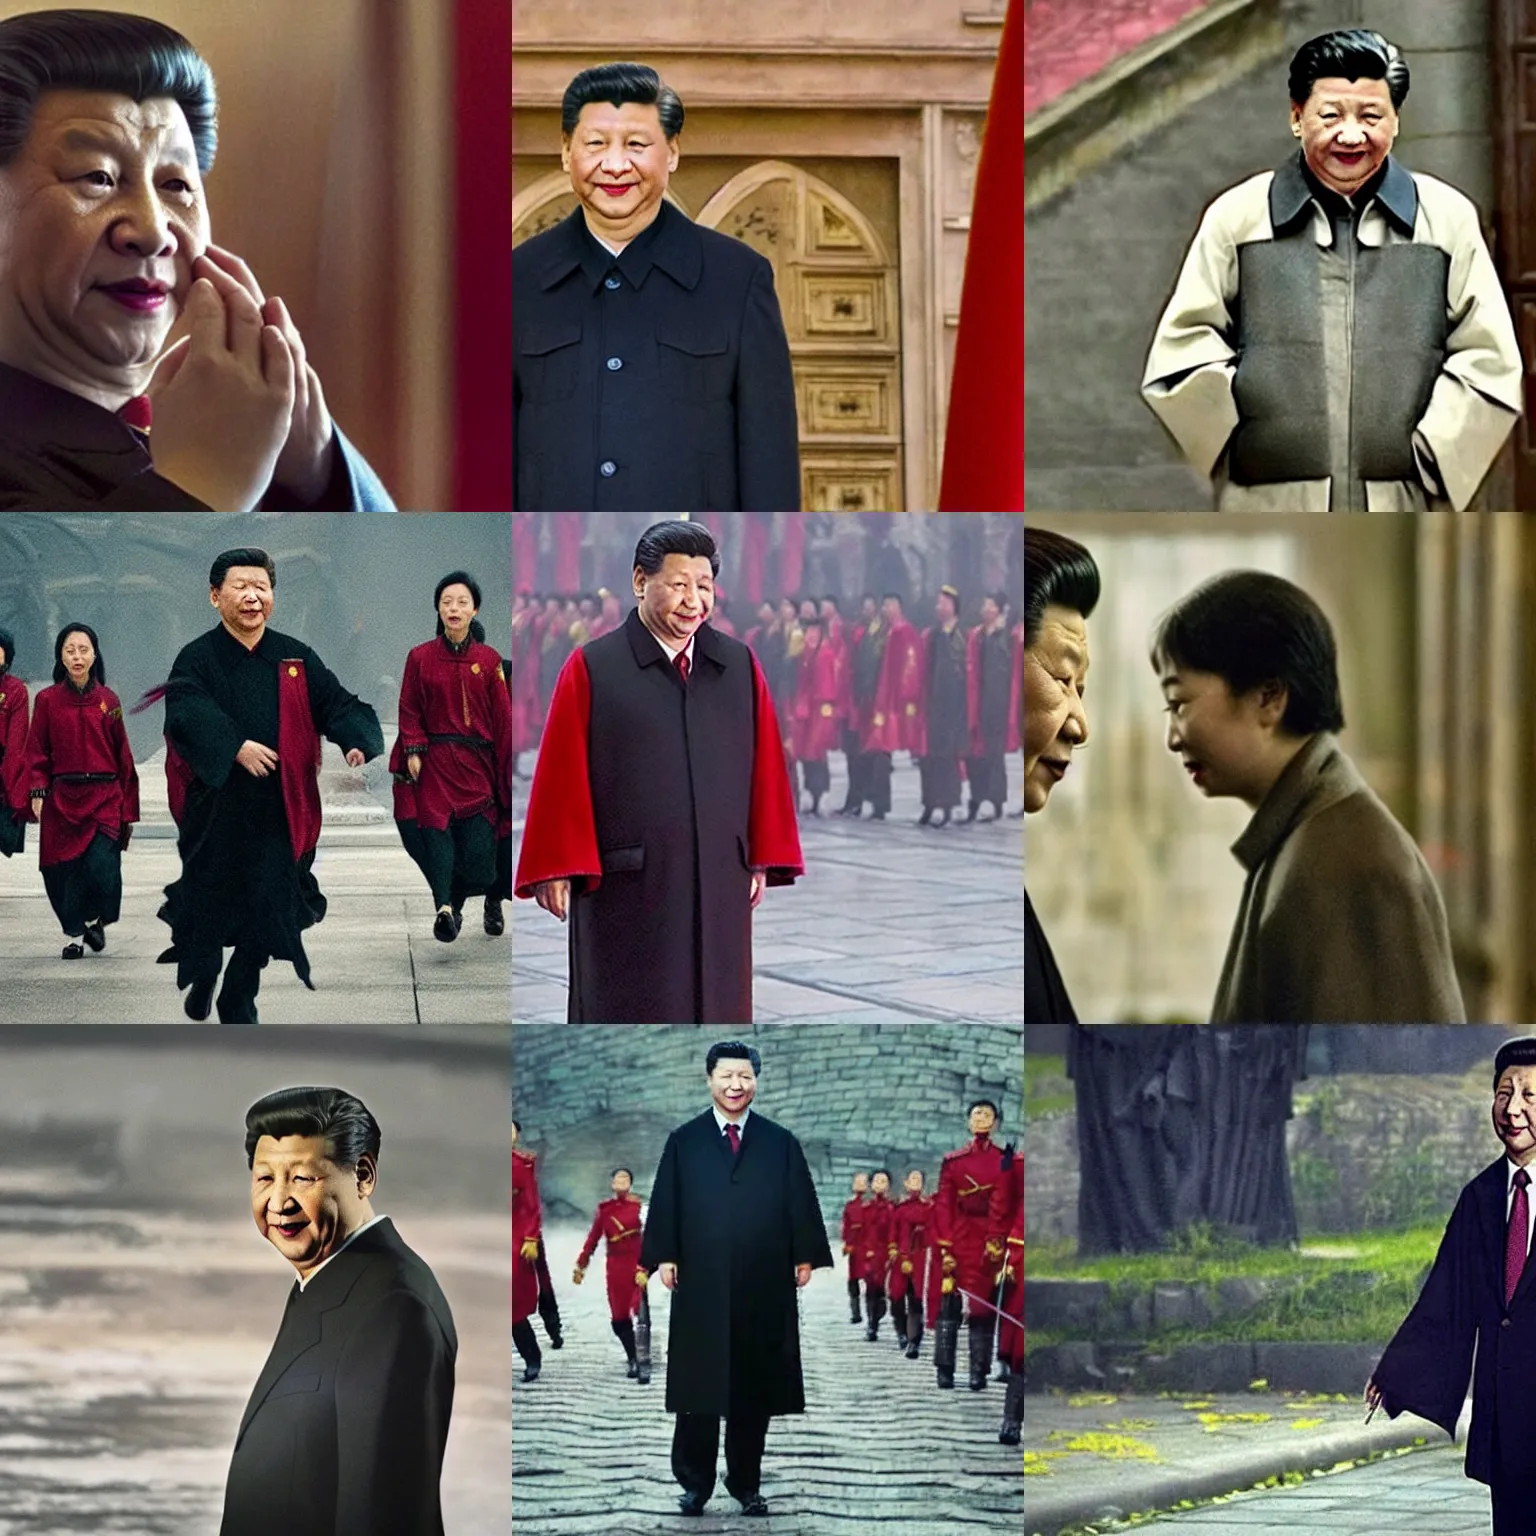 Prompt: Movie still of Xi Jinping in Harry Potter: The Deathly Hallows Part 1